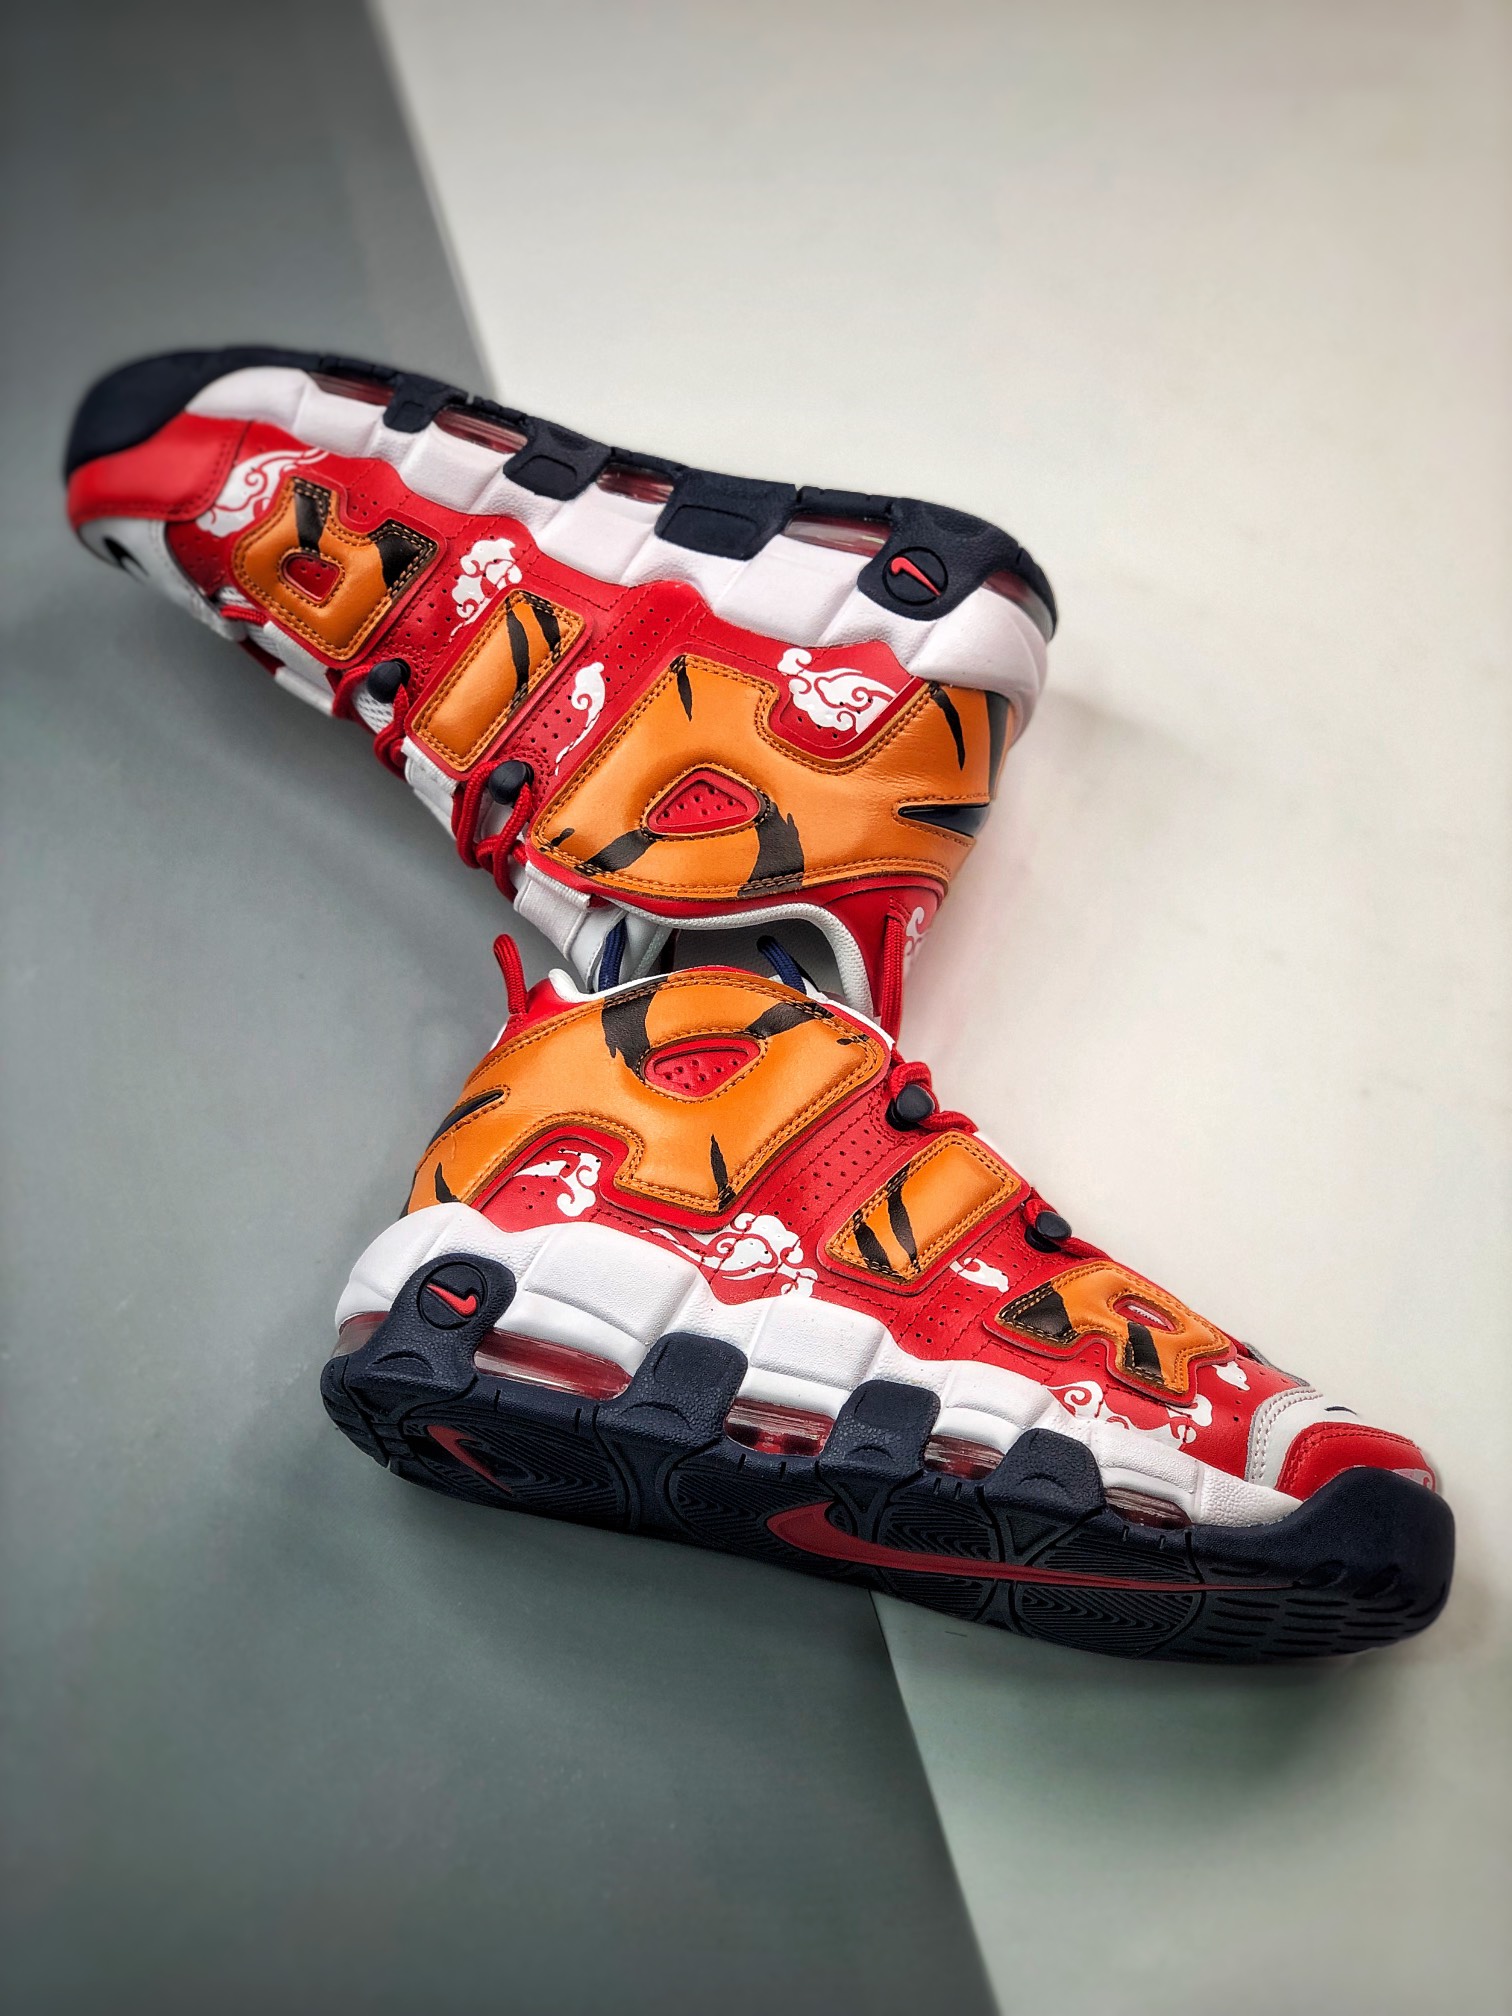 How it's made: CNY Nike Uptempo, How it's made: Custom Nike Uptempos for  Chinese New Year LIKE US for more sneaker videos 👉 sneakernews.com, By  sneakernews.com